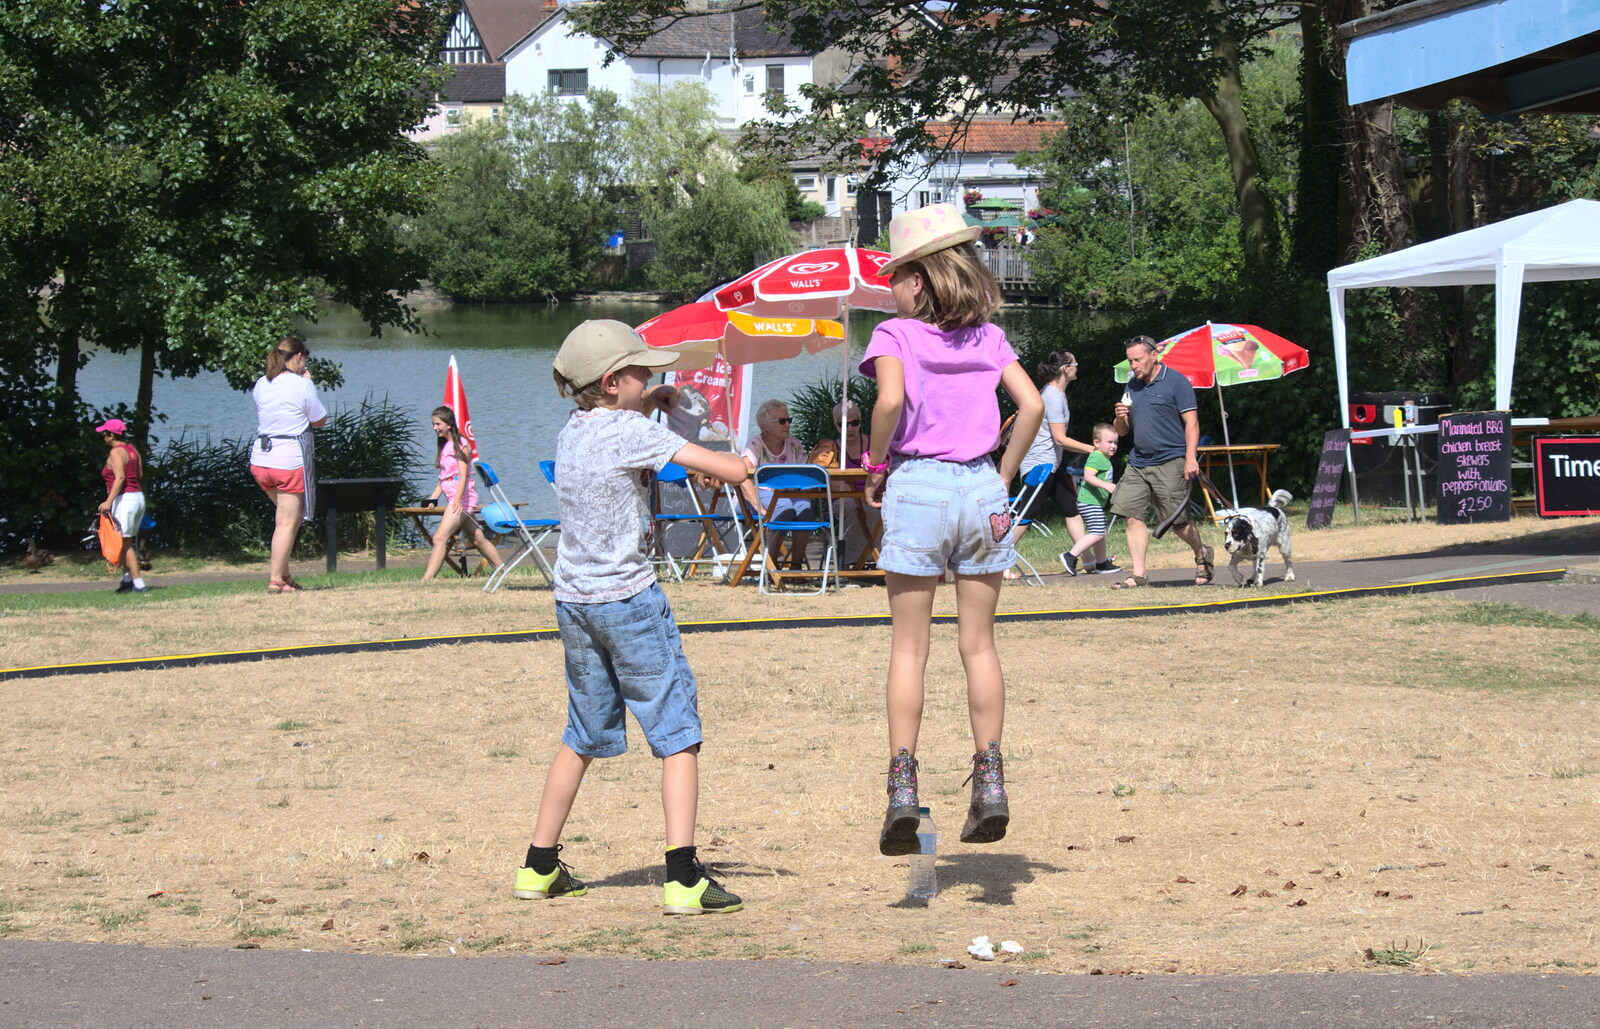 Soph the Roph bounces into the air from Diss Fest, The Park, Diss, Norfolk - 22nd July 2018